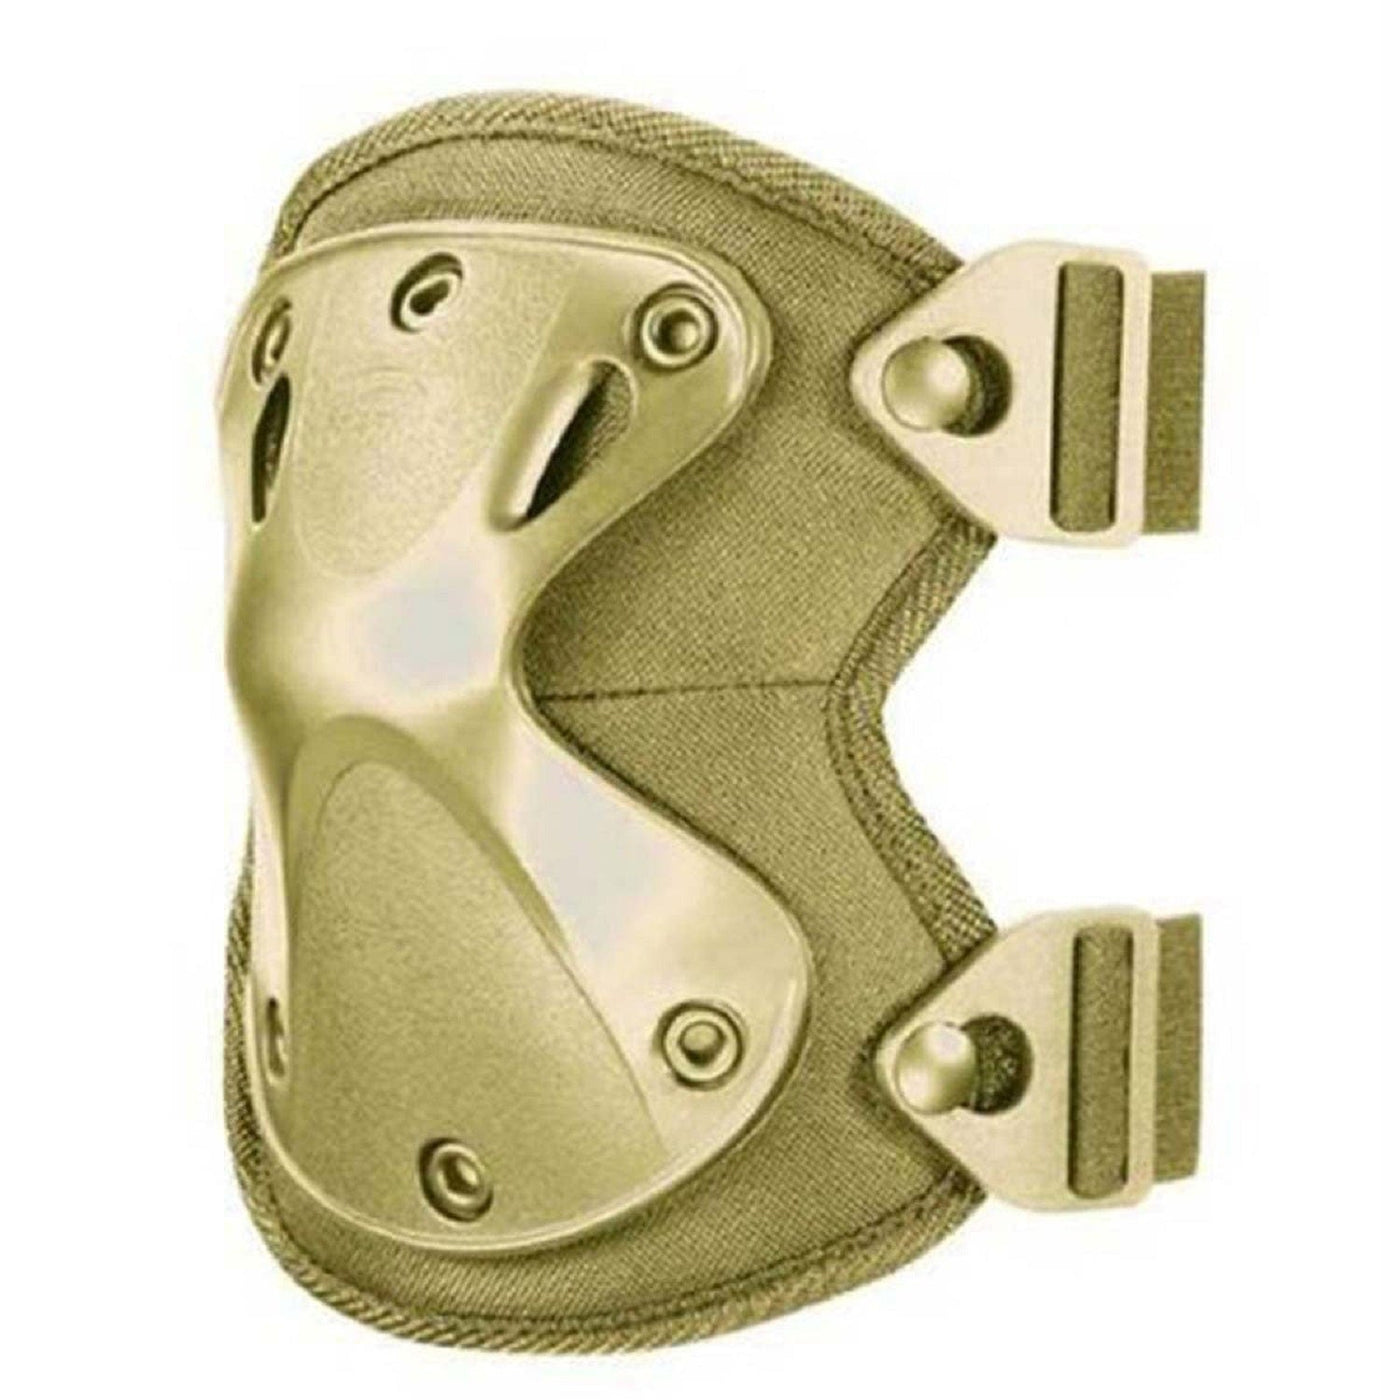 Hatch Hatch XTAK Elbow Pads Coyote Tan Coyote Tan Public Safety And Le